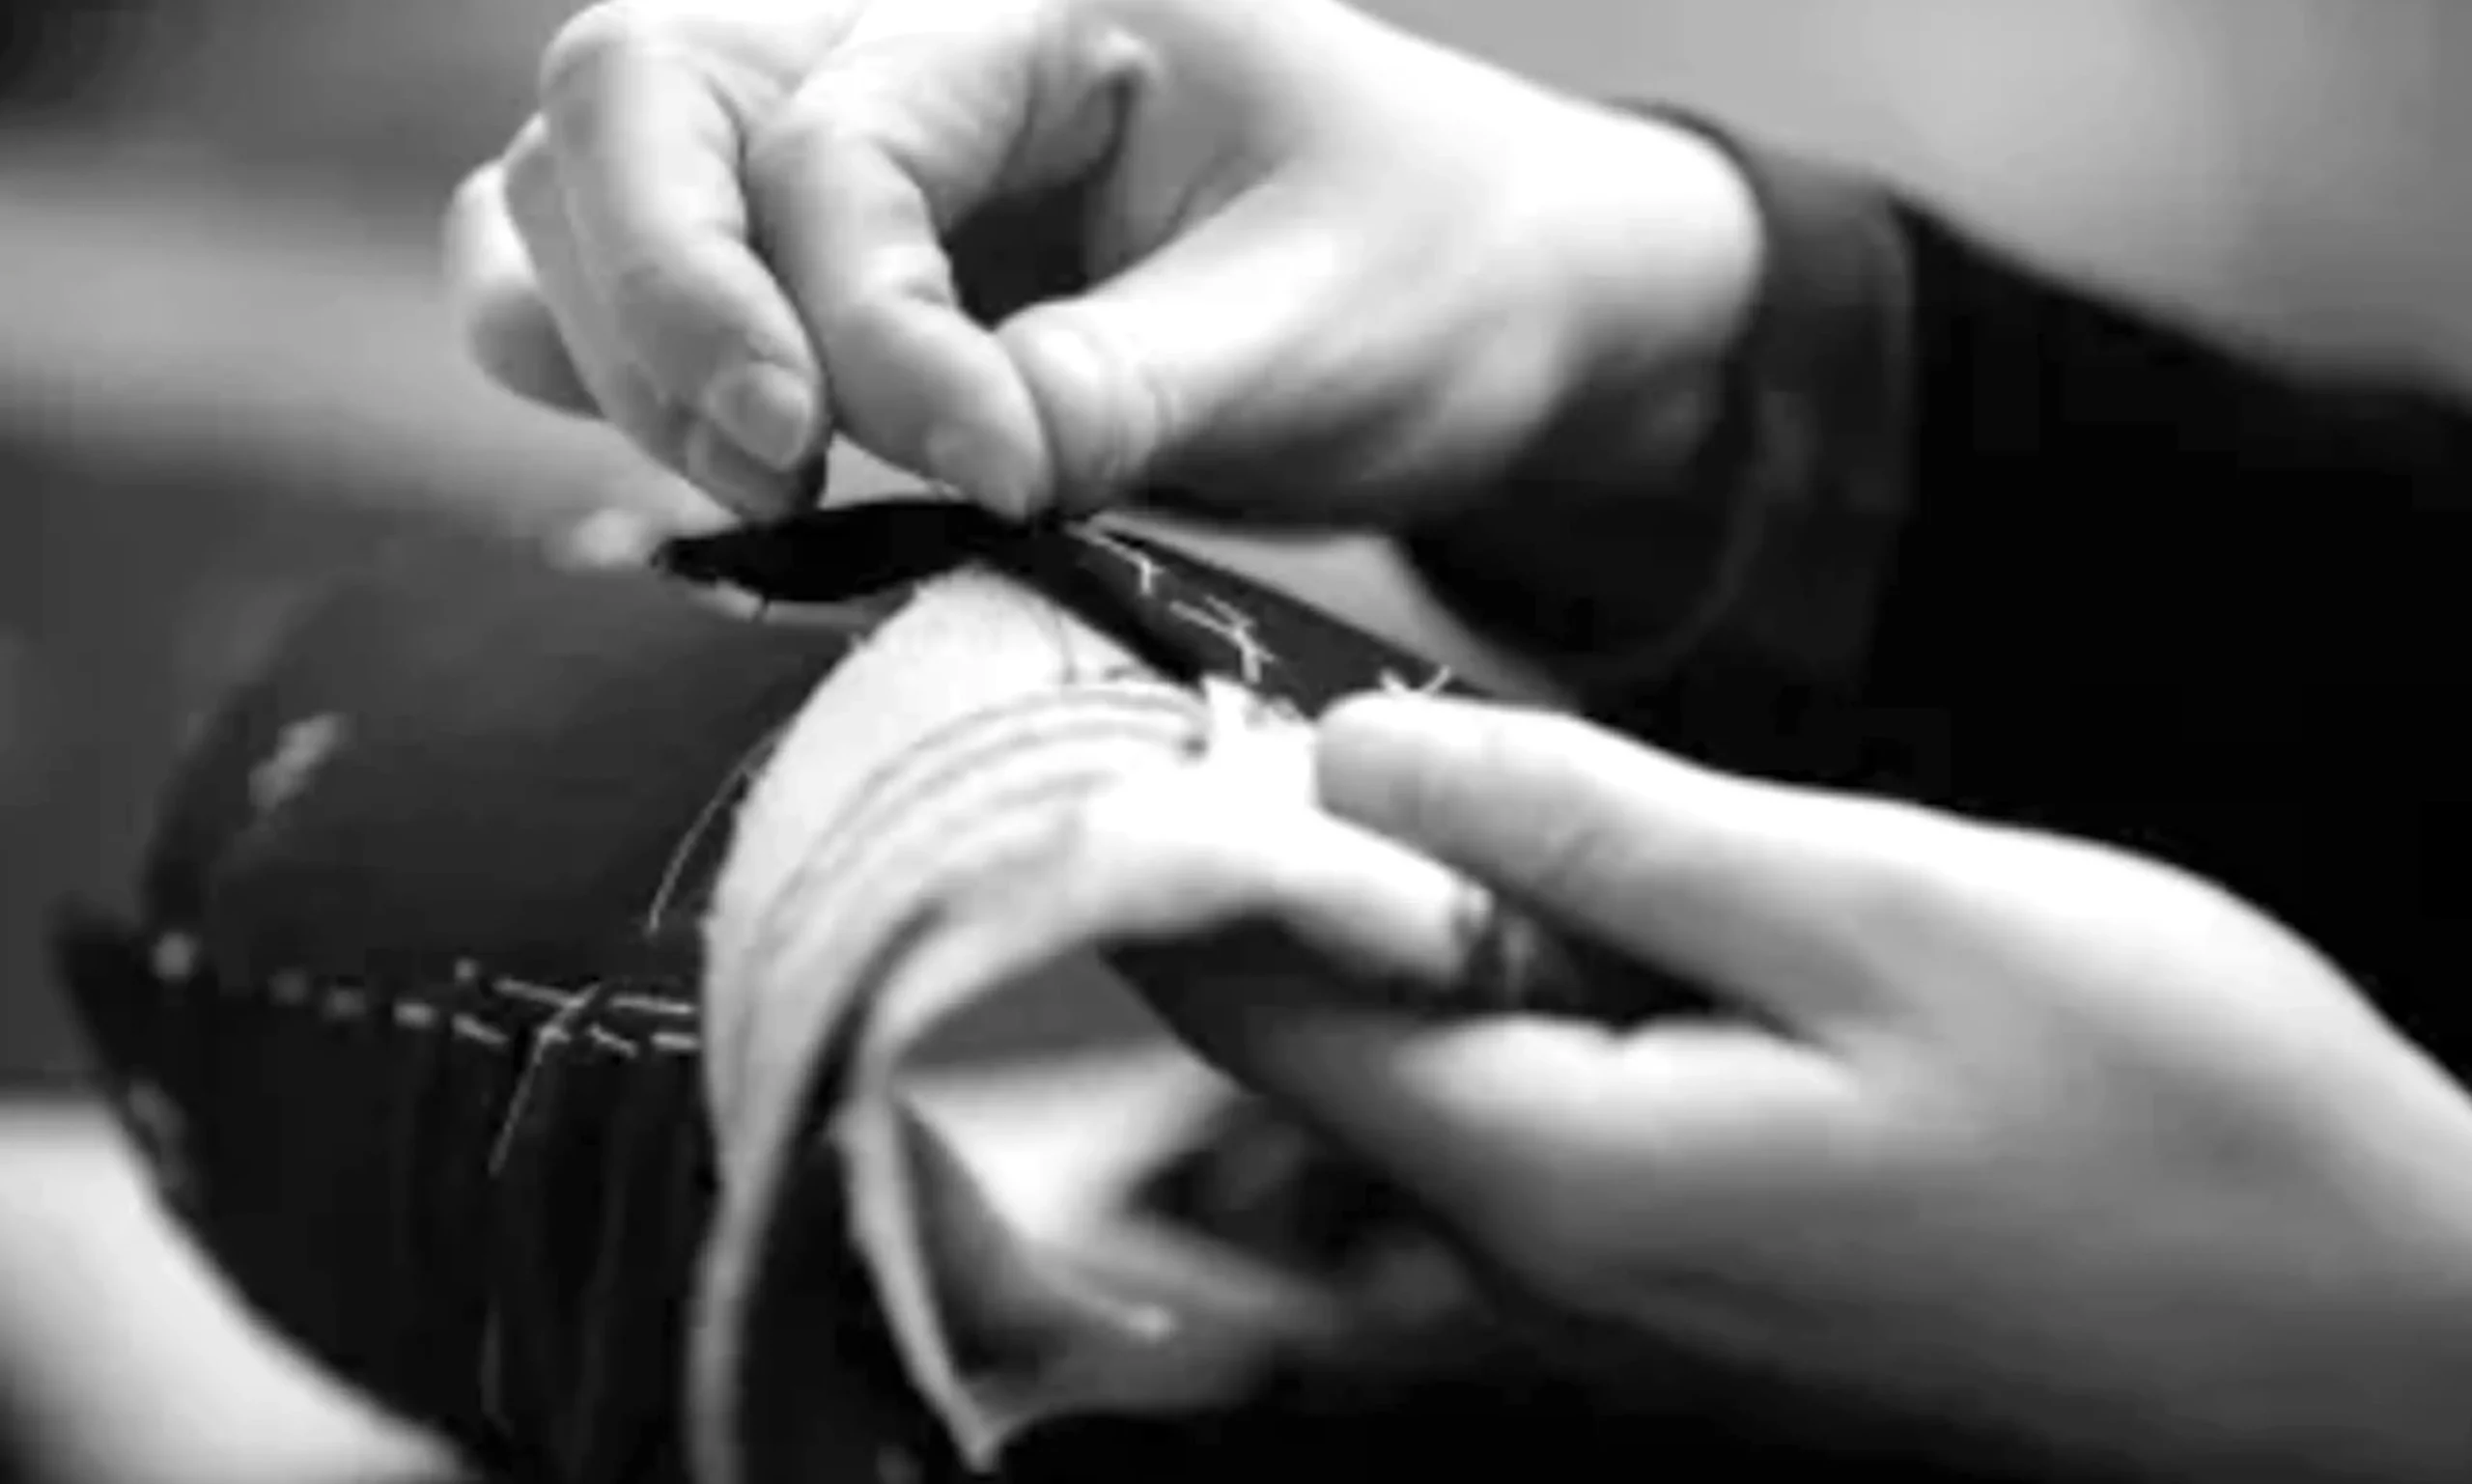 5. Hand Sewing